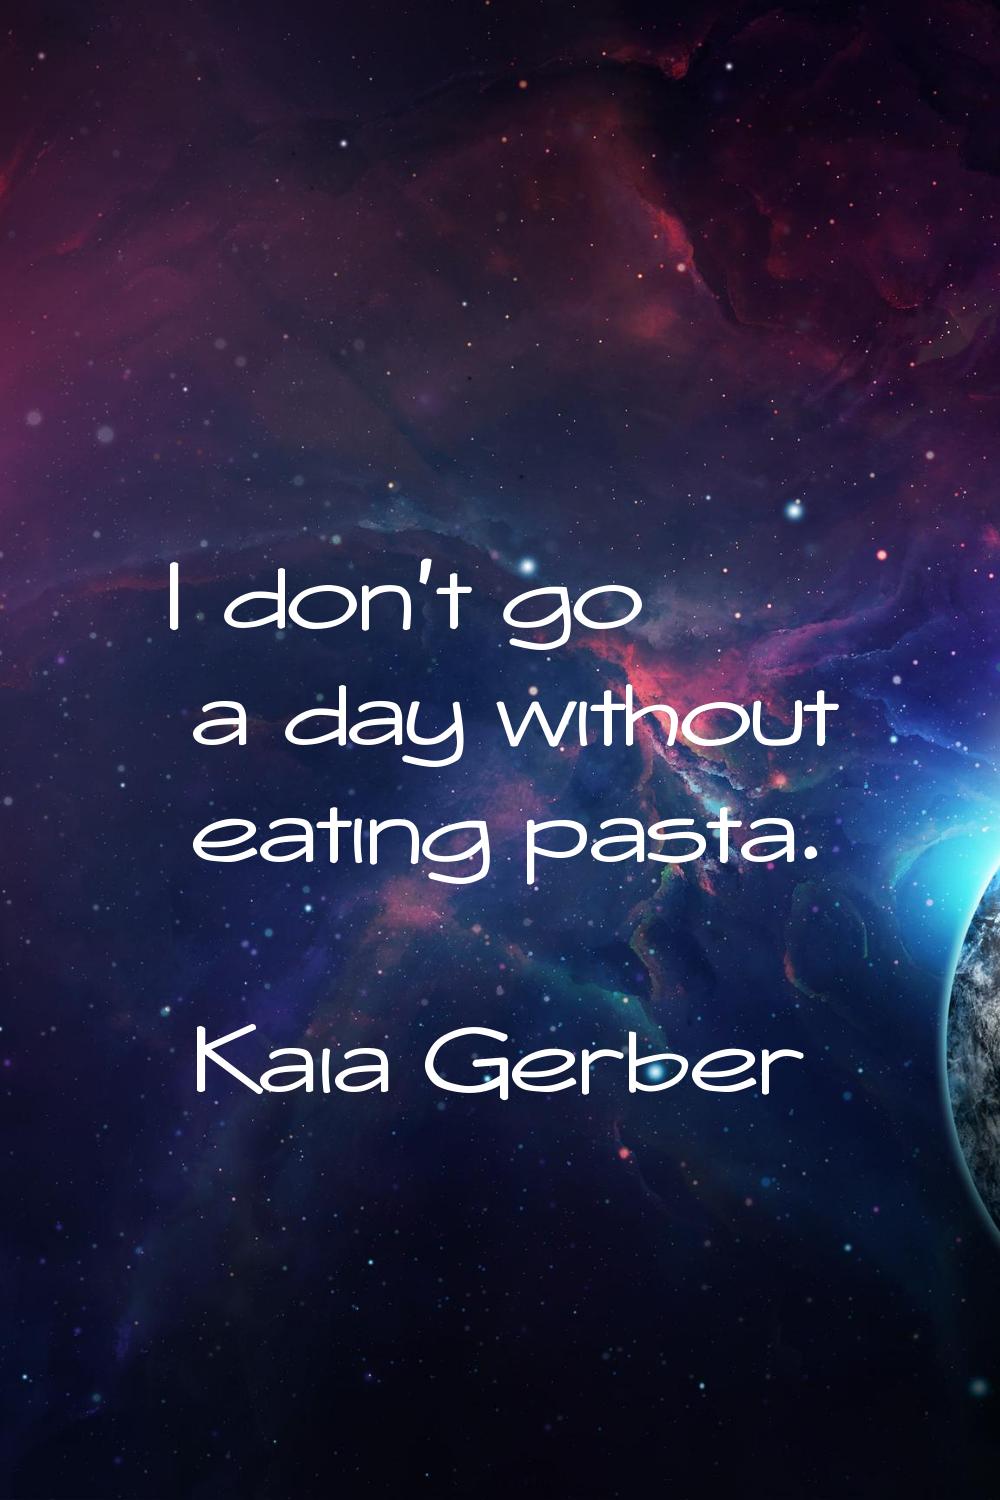 I don't go a day without eating pasta.